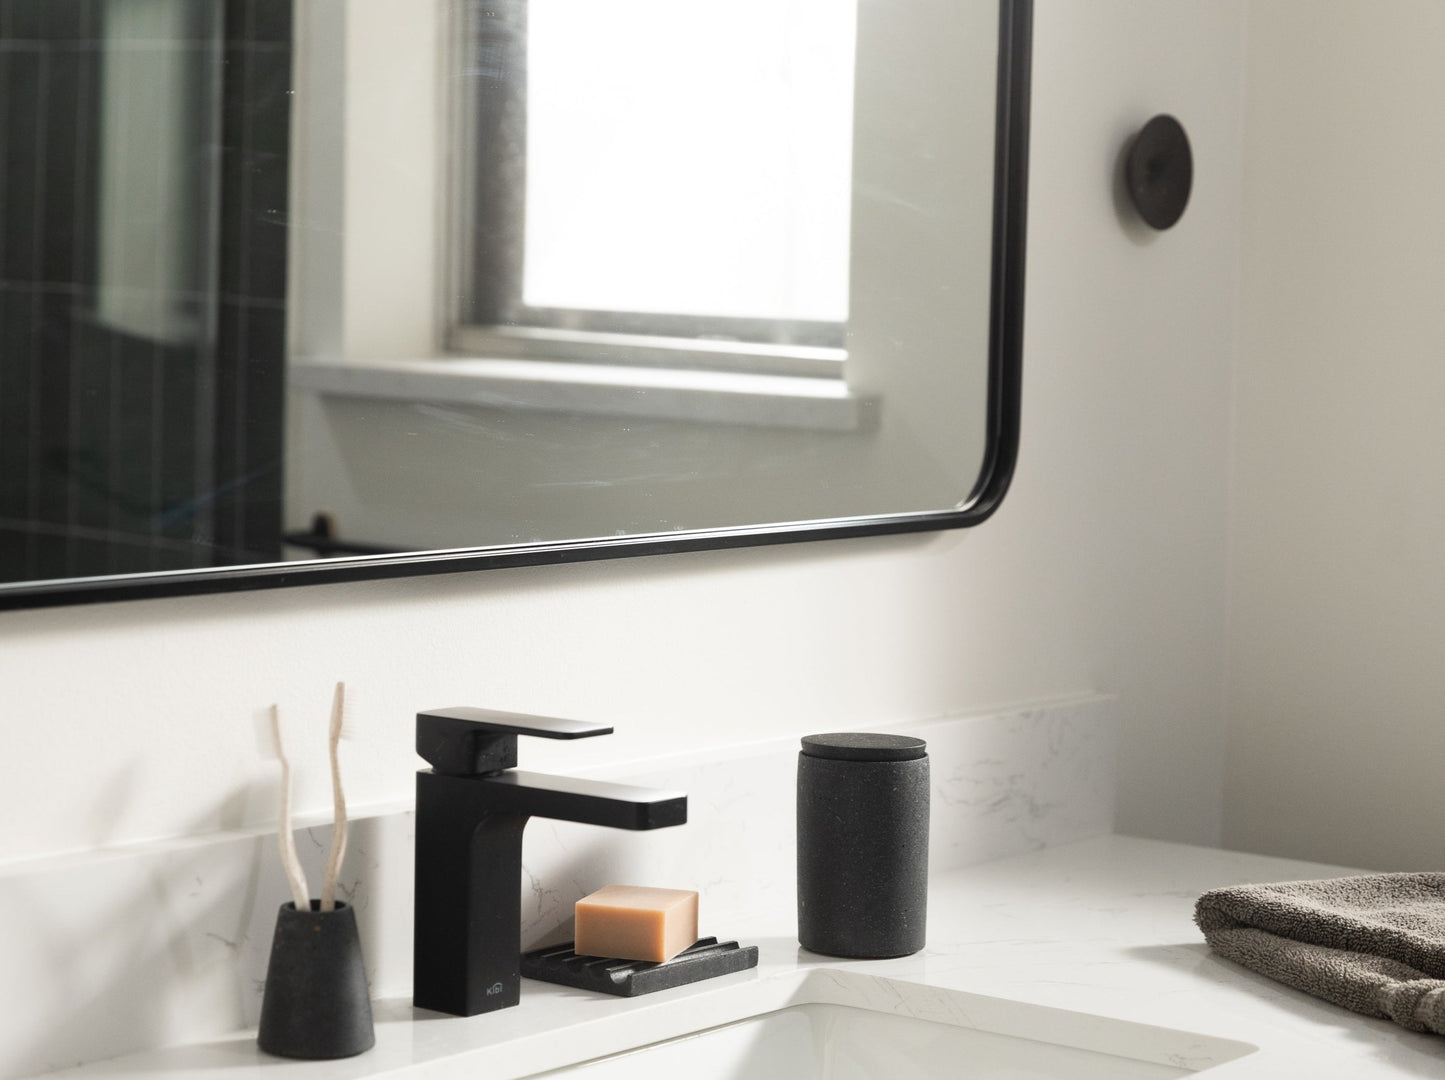 Cotton swab holder, paired with a toothbrush holder and soap dish, all in black terrazzo, styled by a sink.